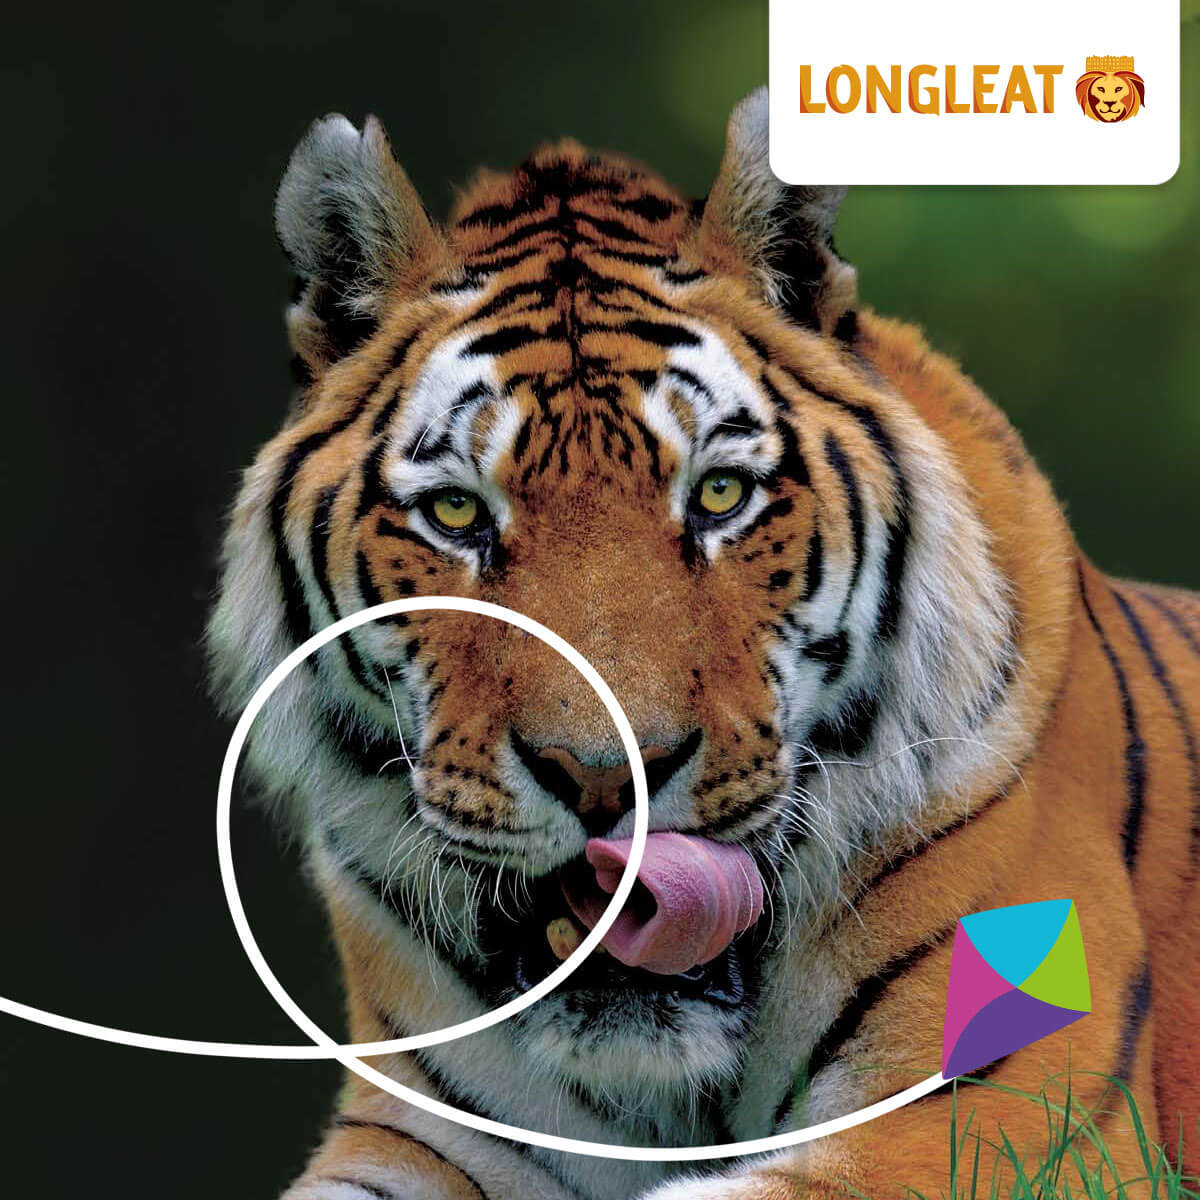 Longleat Tickets 10 Off Exclusive Discount